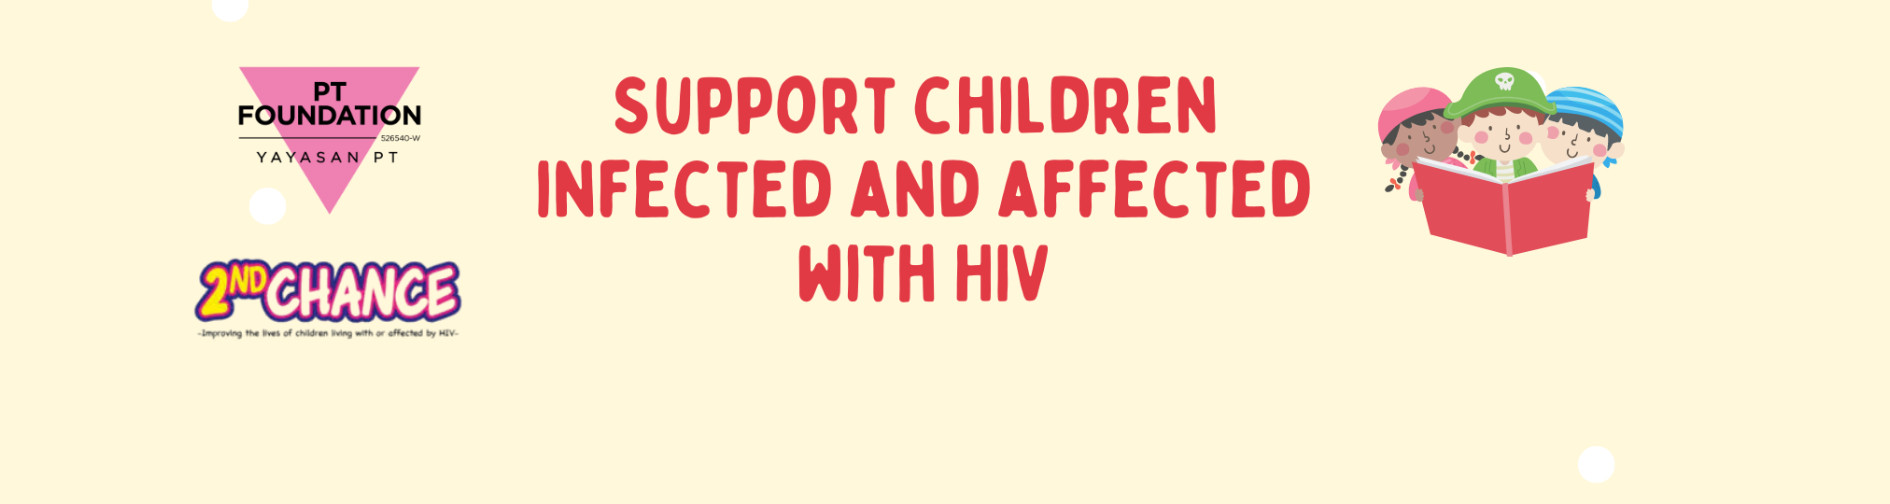 Academic Mentorship Program for HIV Infected and Affected Children